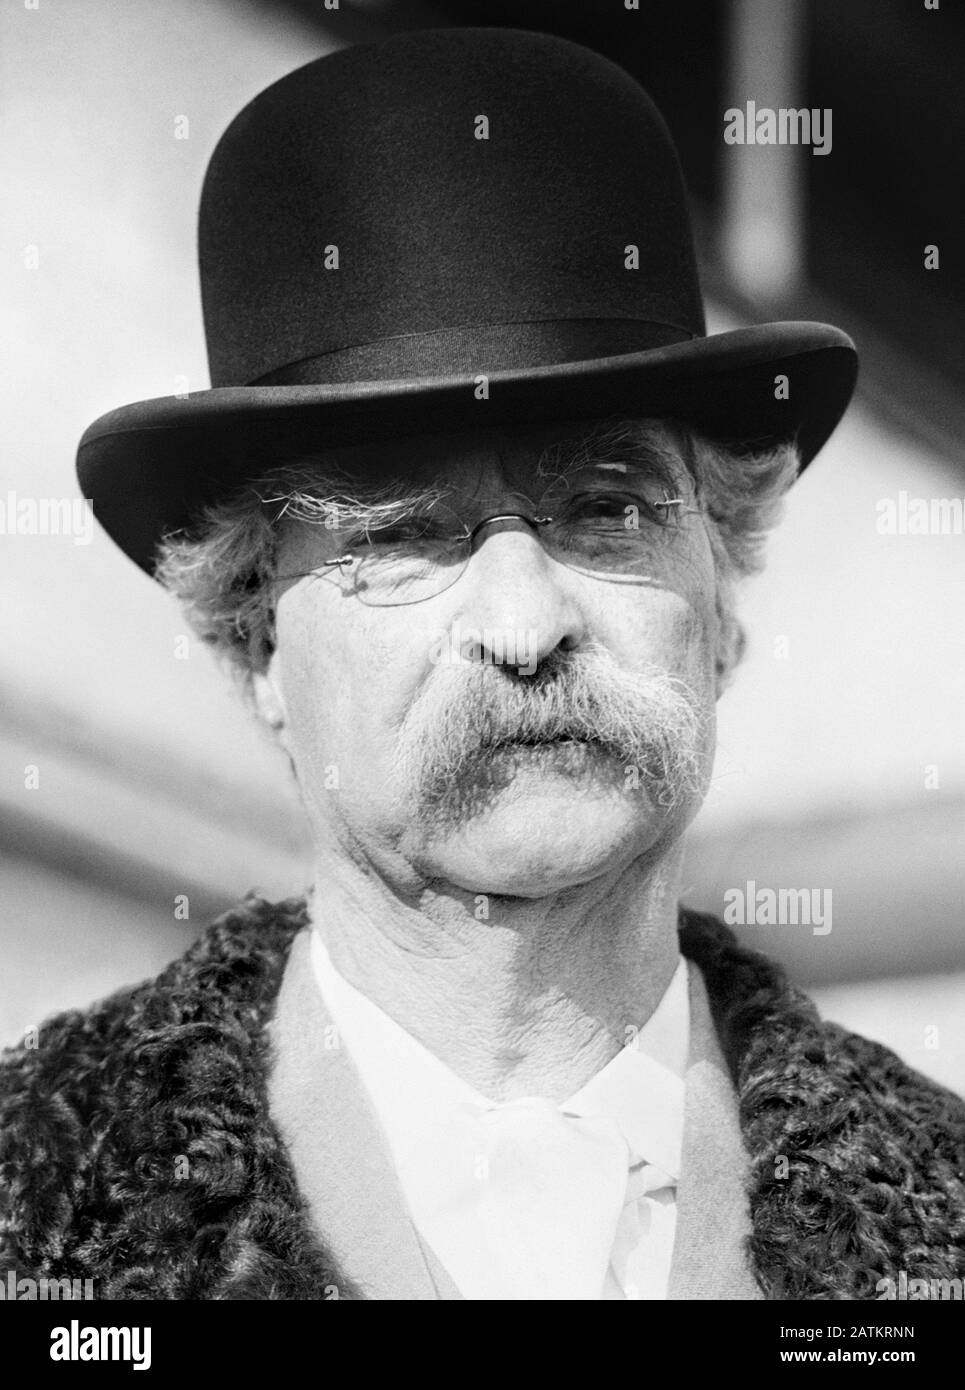 Vintage photo of American writer and humourist Samuel Langhorne Clemens (1835 – 1910), better known by his pen name of Mark Twain. Photo circa 1909 by Bain News Service. Stock Photo